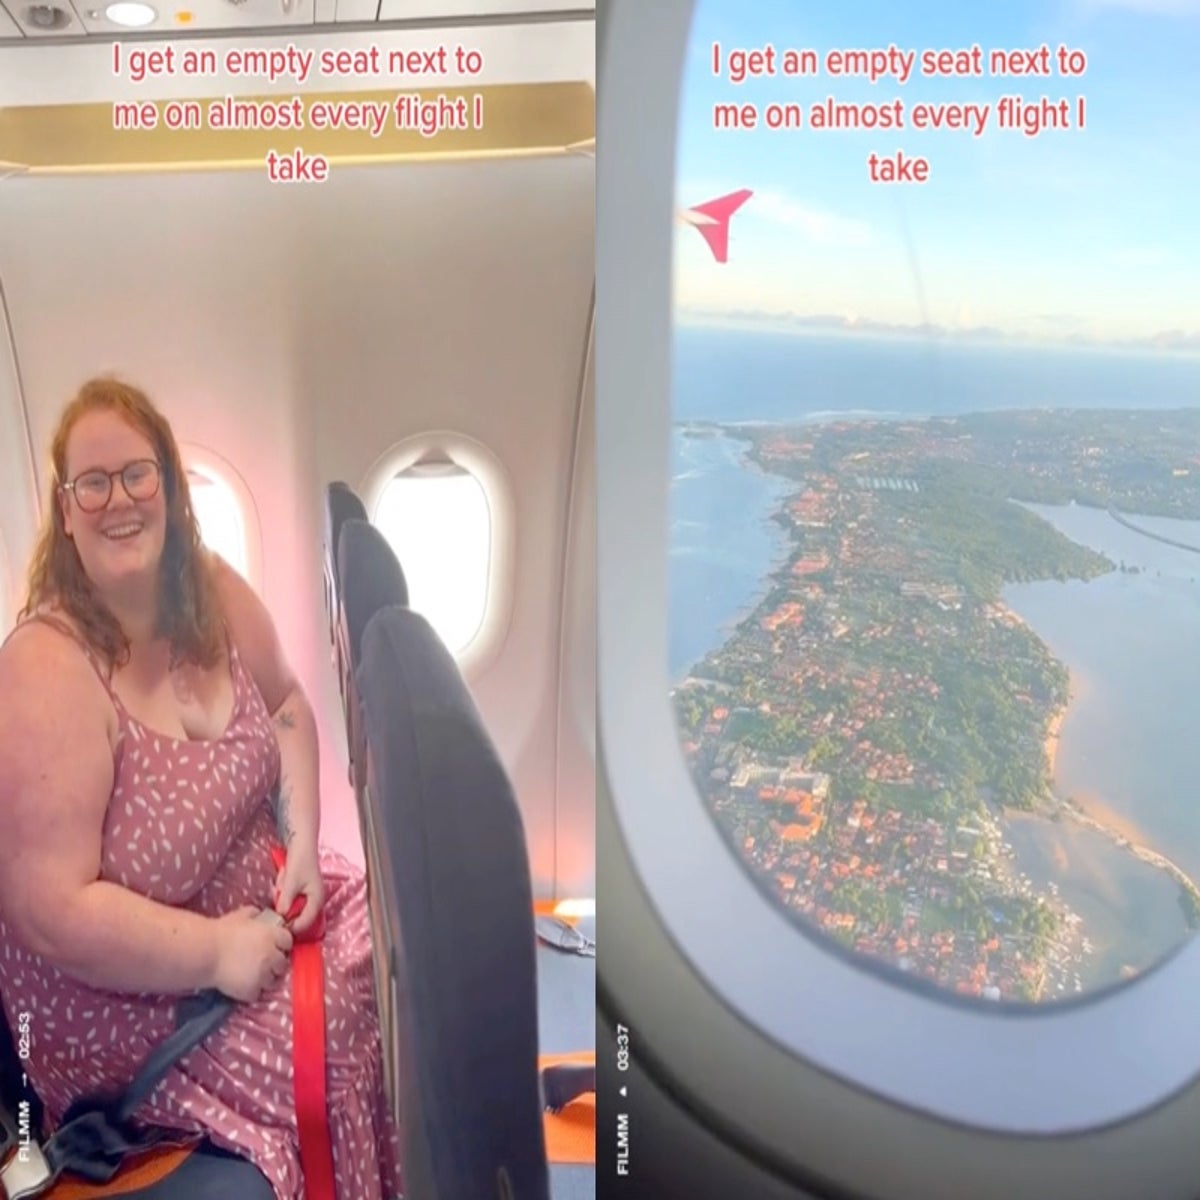 Plus-size influencer calls for bigger airline seats after she was